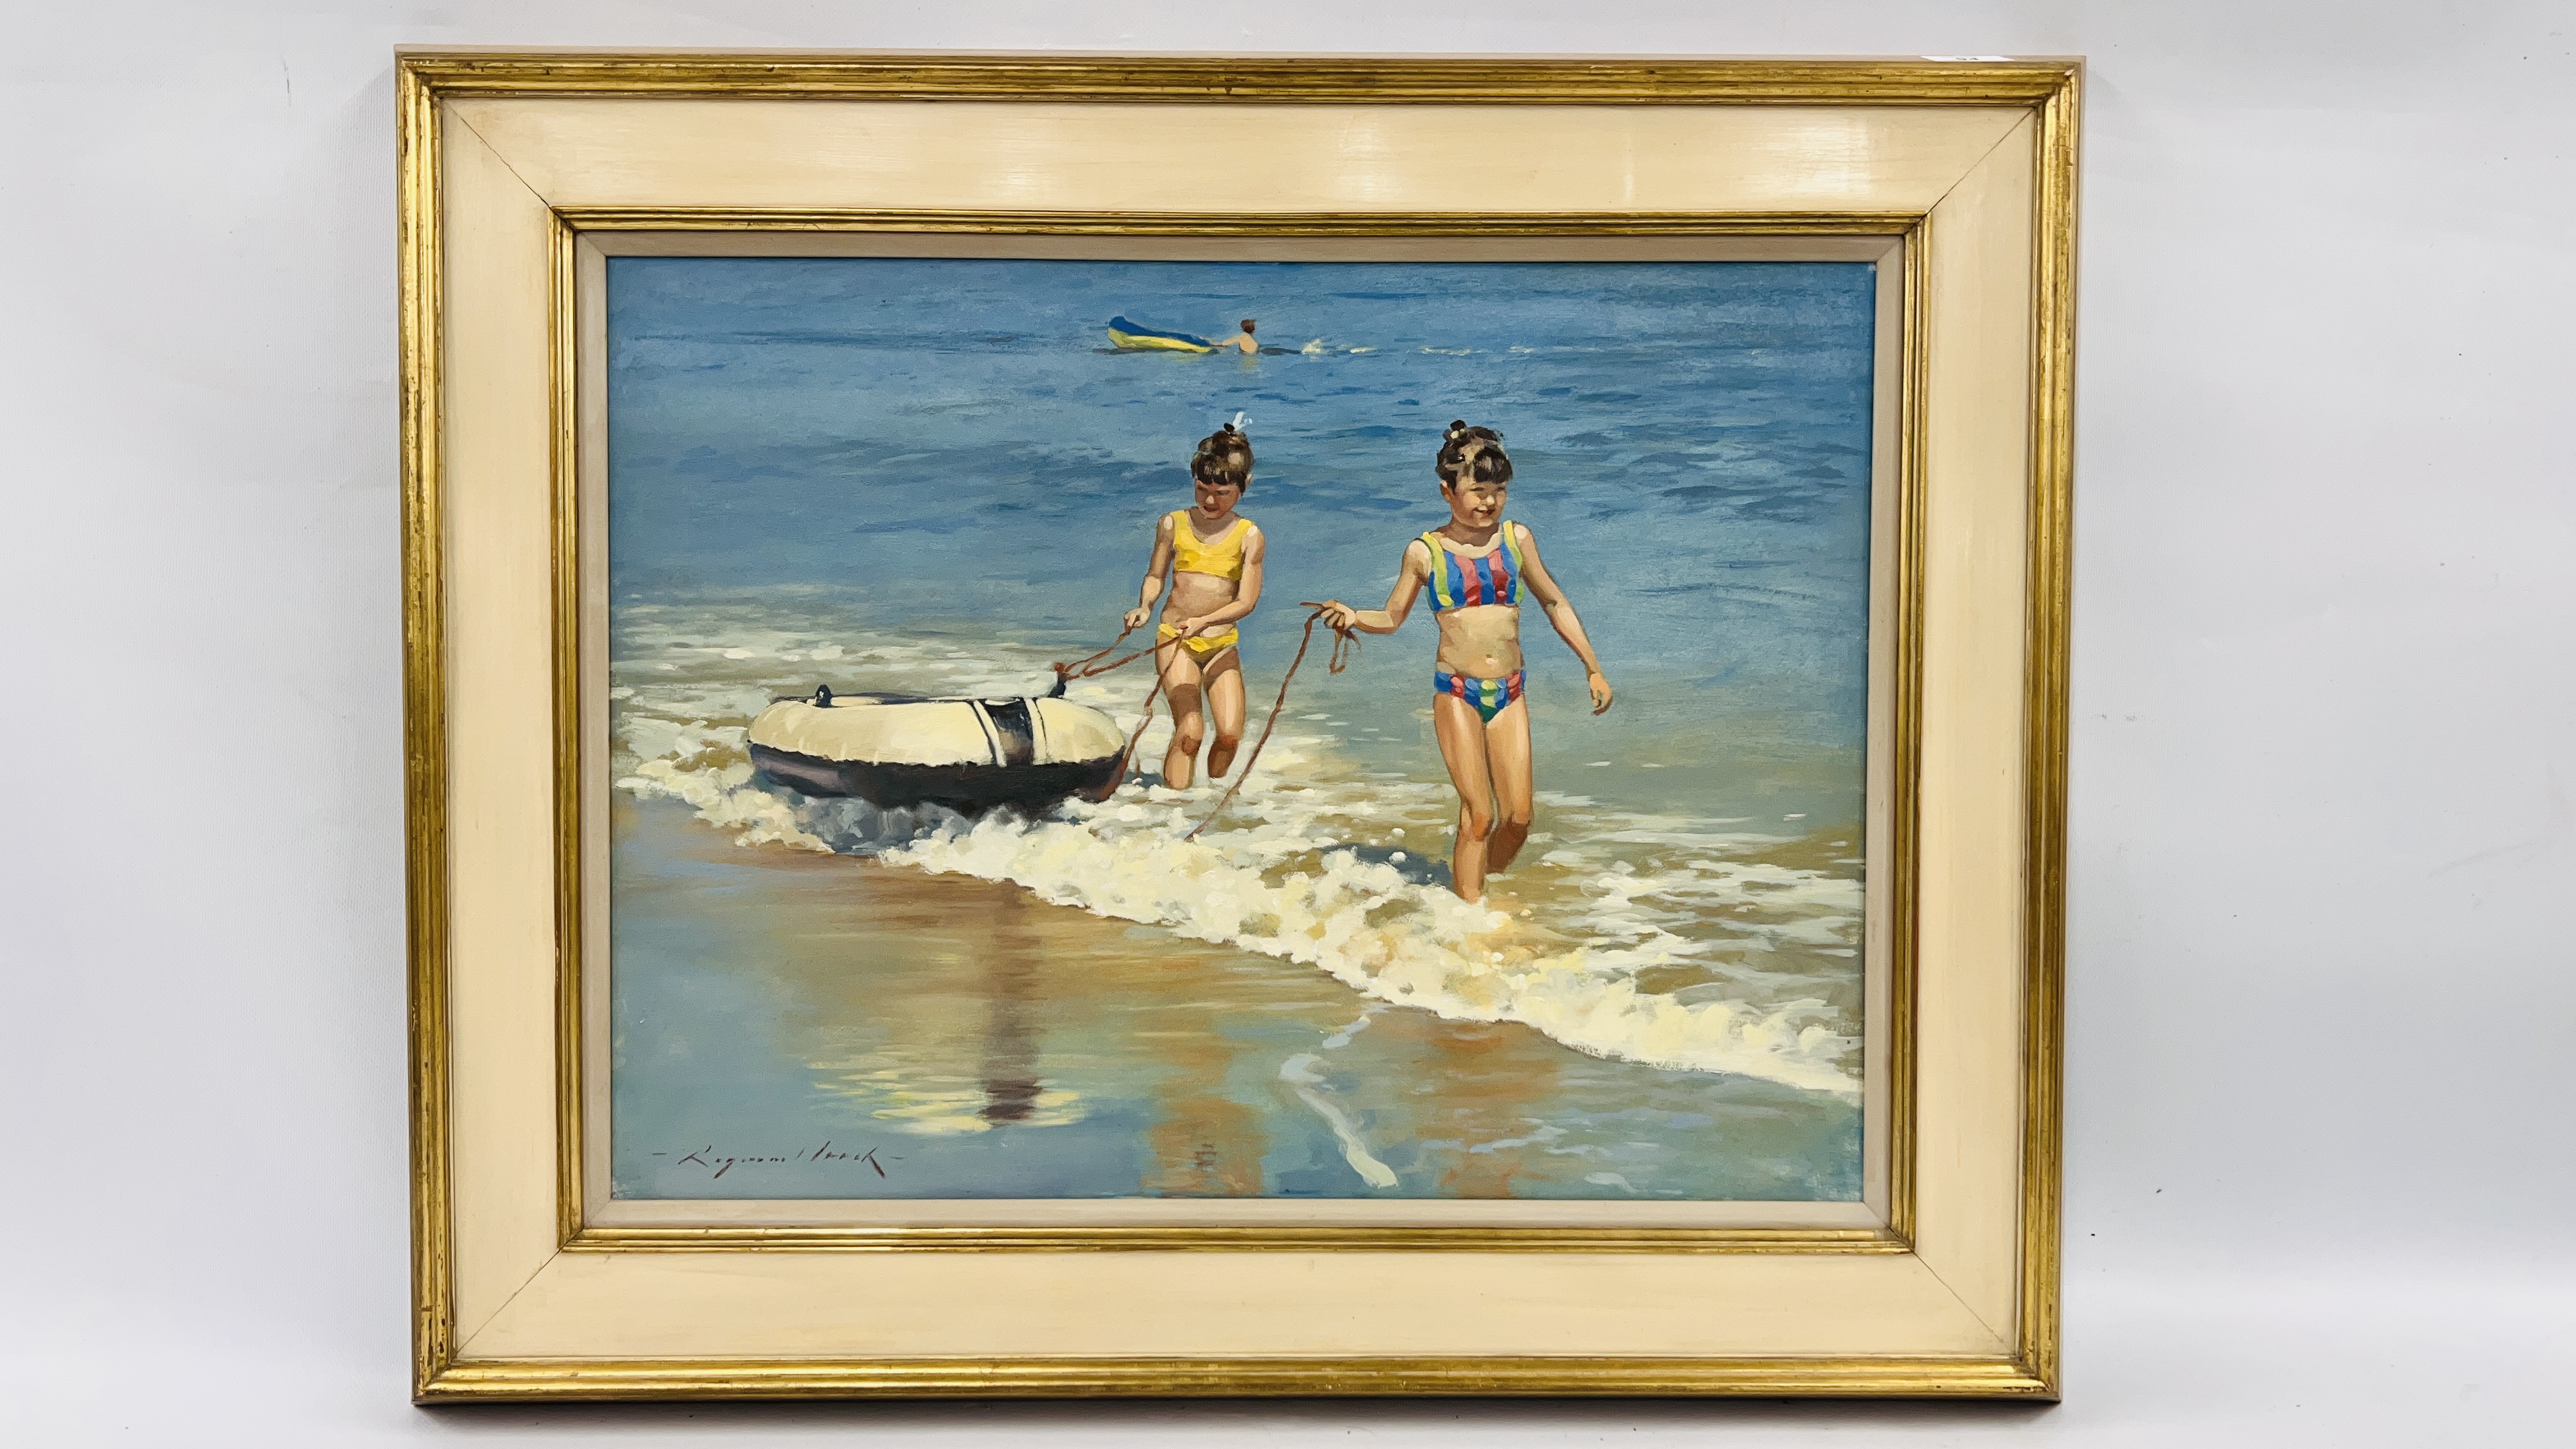 OIL ON BOARD "CHILDREN WITH INFLATABLE BOAT" BEARING SIGNATURE RAYMOND LEECH 45 X 60CM.